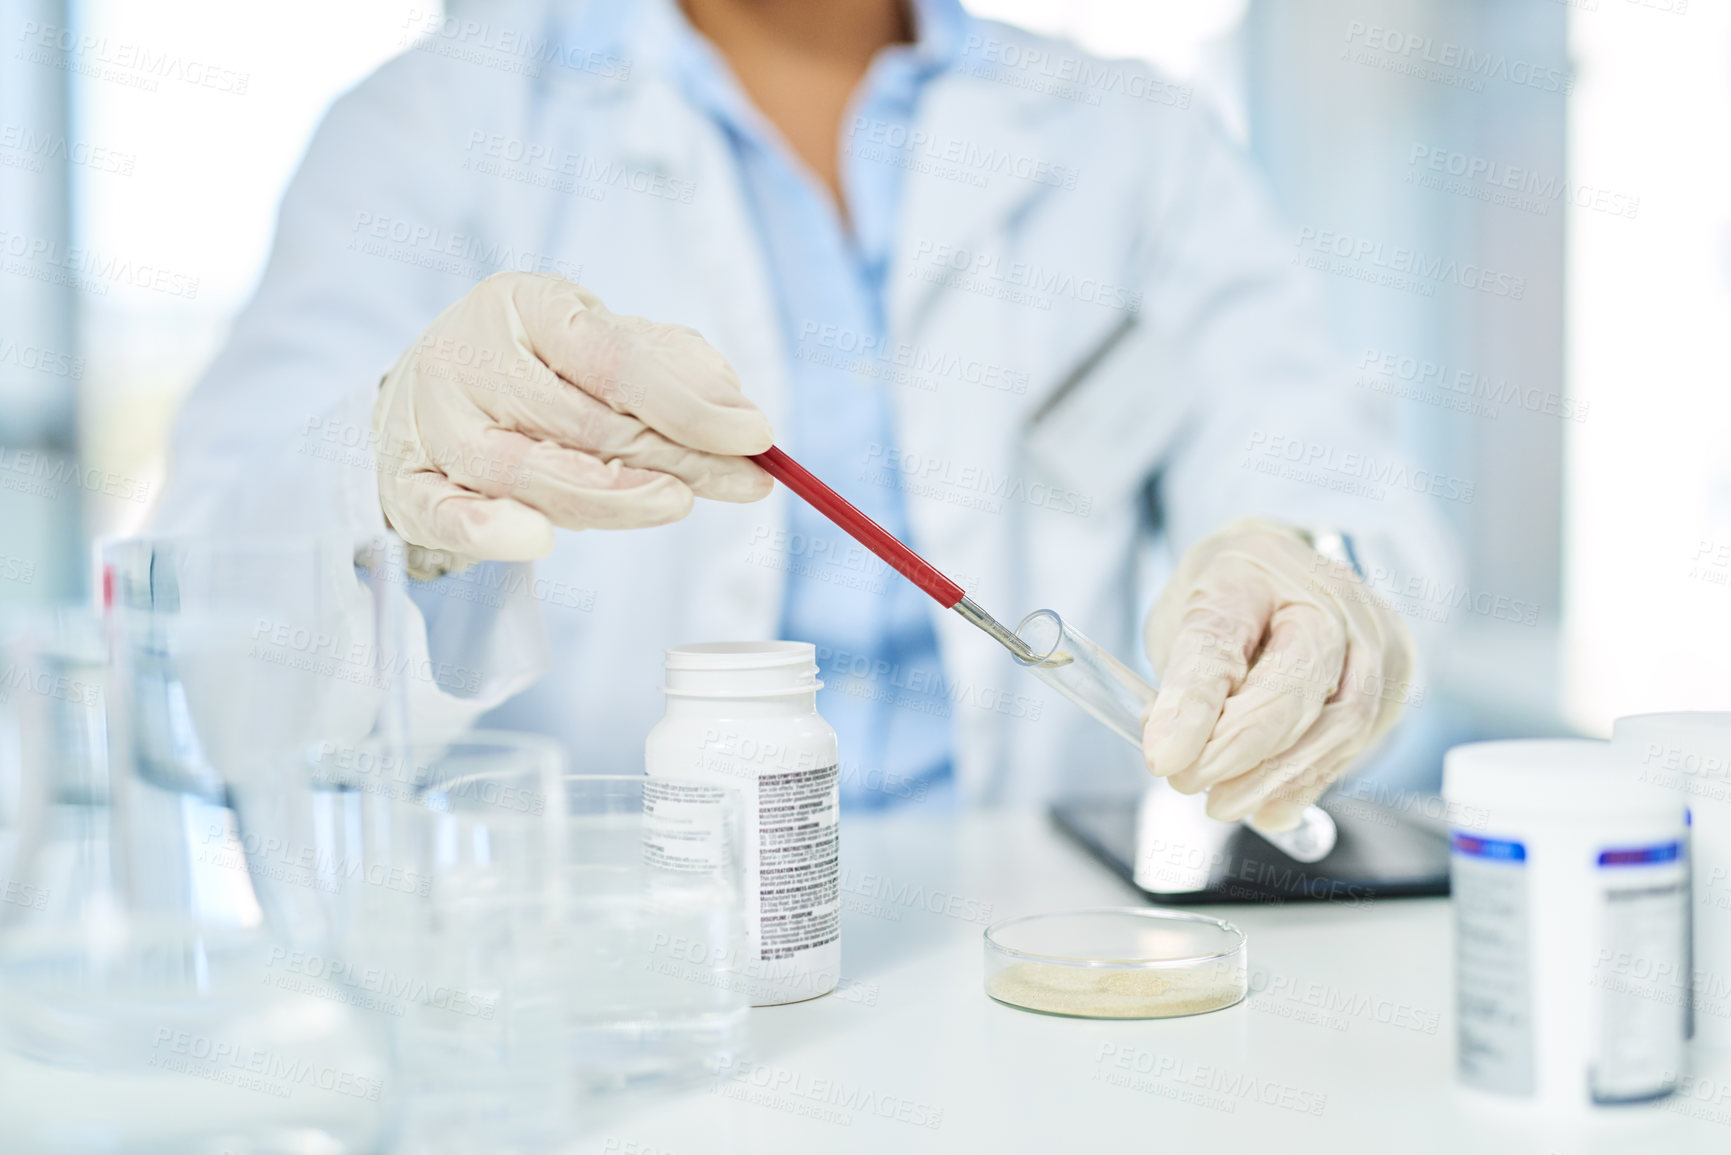 Buy stock photo Closeup shot of an unrecognizable scientist working in a lab